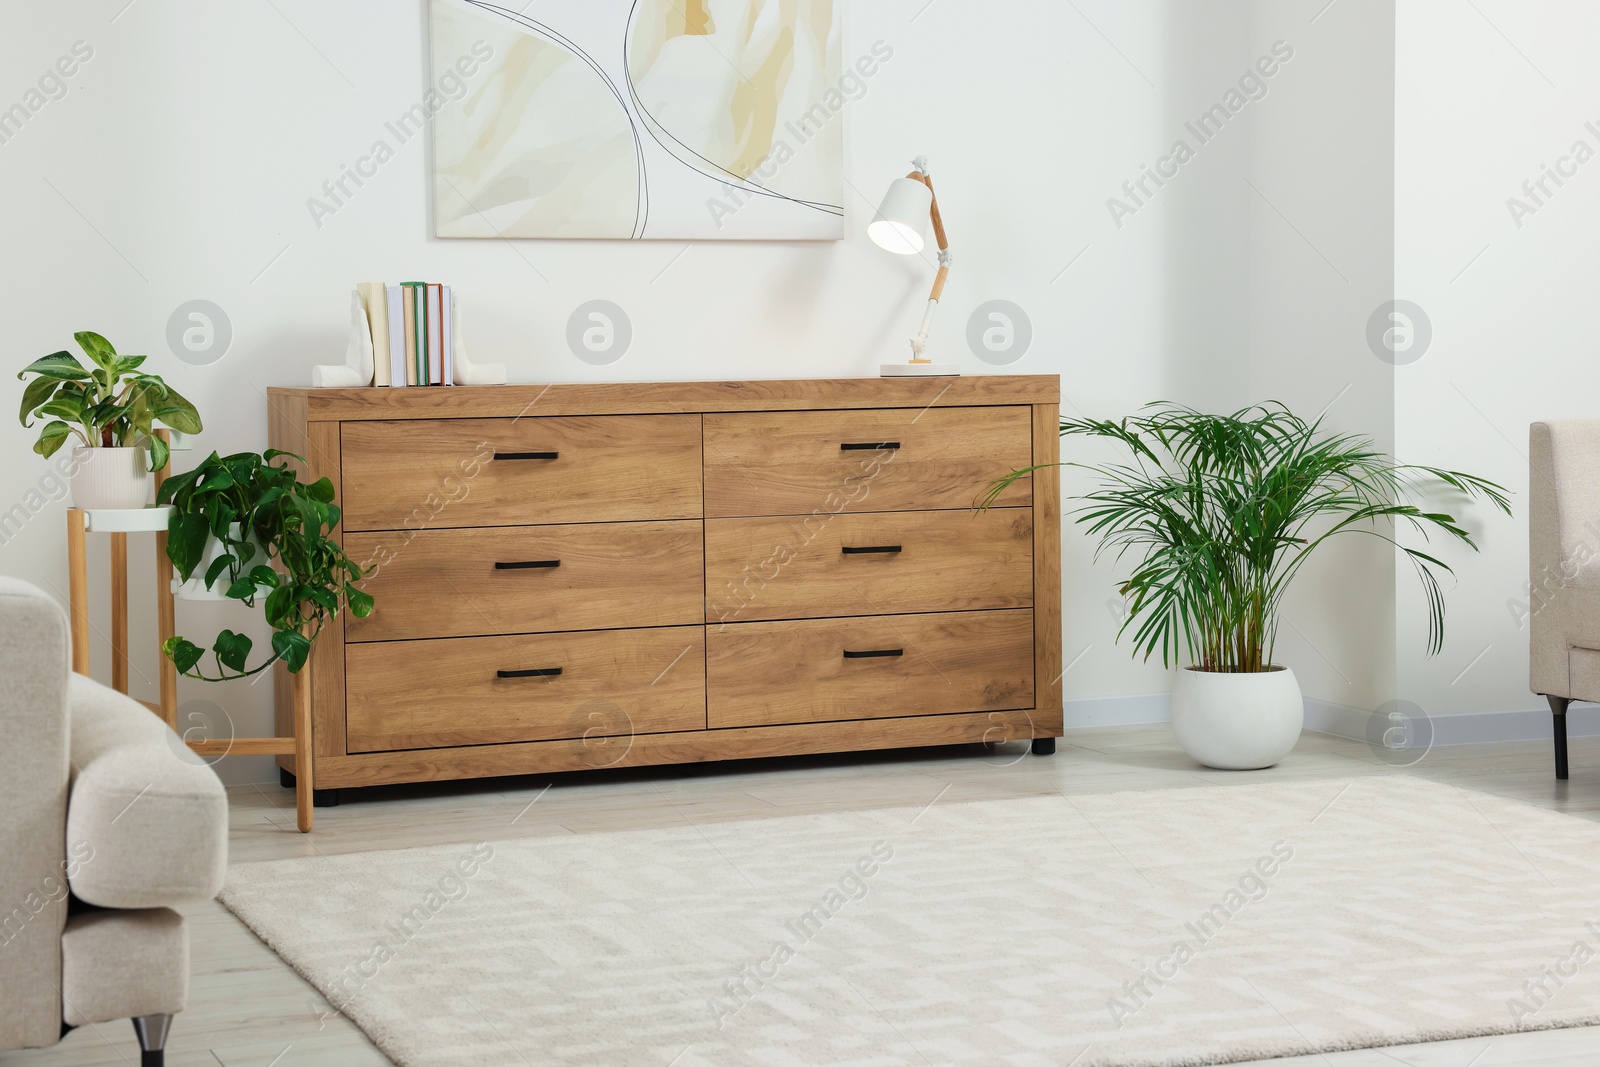 Photo of Stylish living room with wooden chest of drawers, potted plants and beautiful picture. Interior design